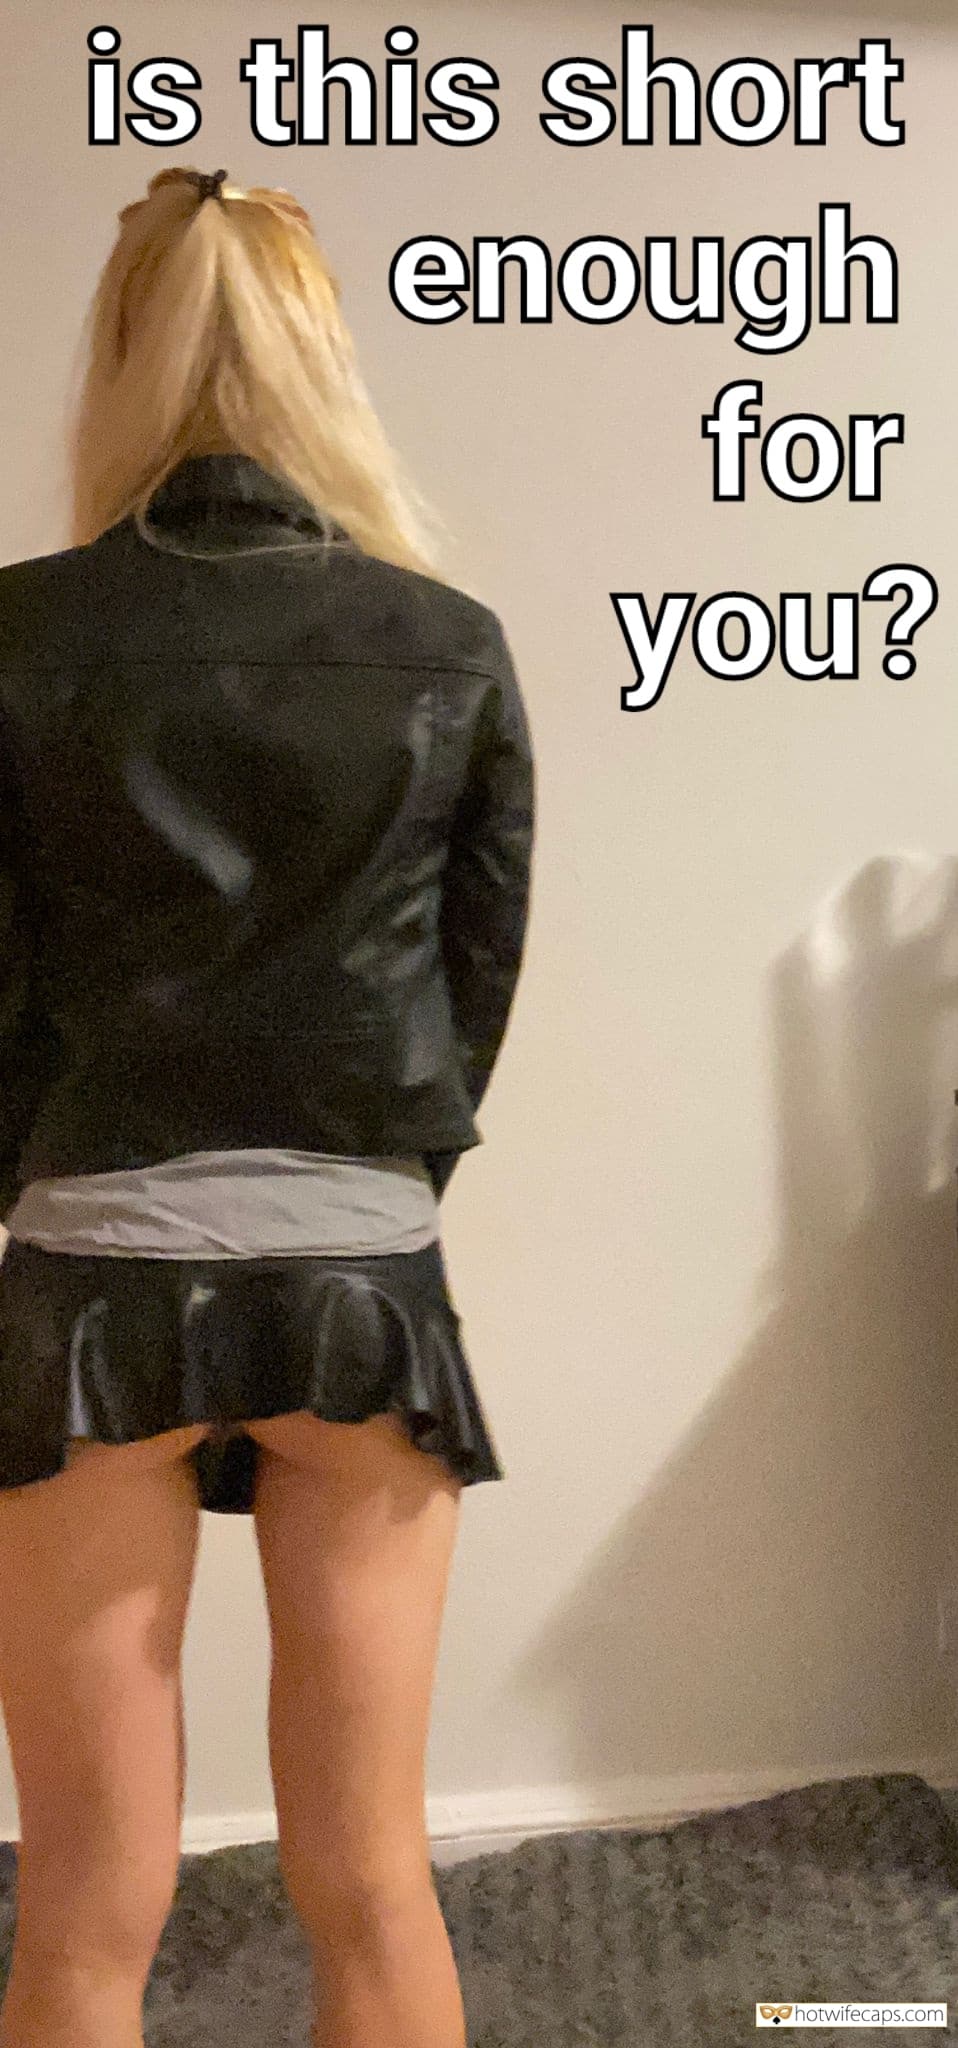 No Panties Getting Ready Dirty Talk Challenges and Rules hotwife caption: is this short enough for you? mini skirt porn captions mini skirt slut caption Petite Blonde in Latex Mini Skirt – No Panties for Easy Access